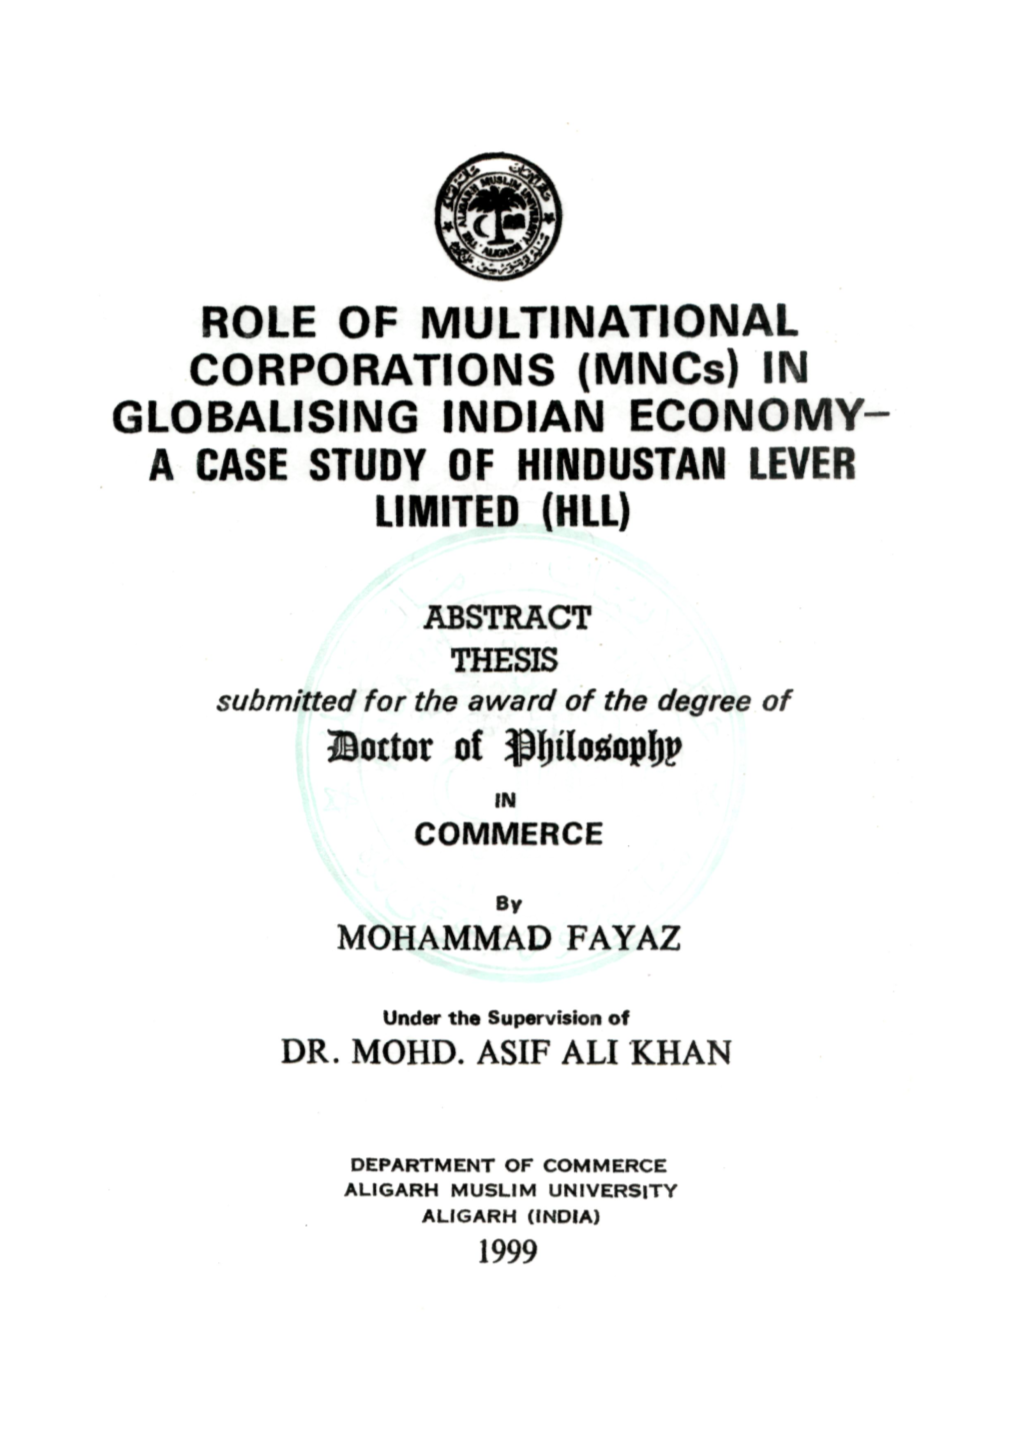 ROLE of MULTINATIONAL CORPORATIONS (Mncs) in GLOBALISING INDIAN ECONOMY- a CASE STUDY of HINDUSTAN LEVER LIMITED (HLL)